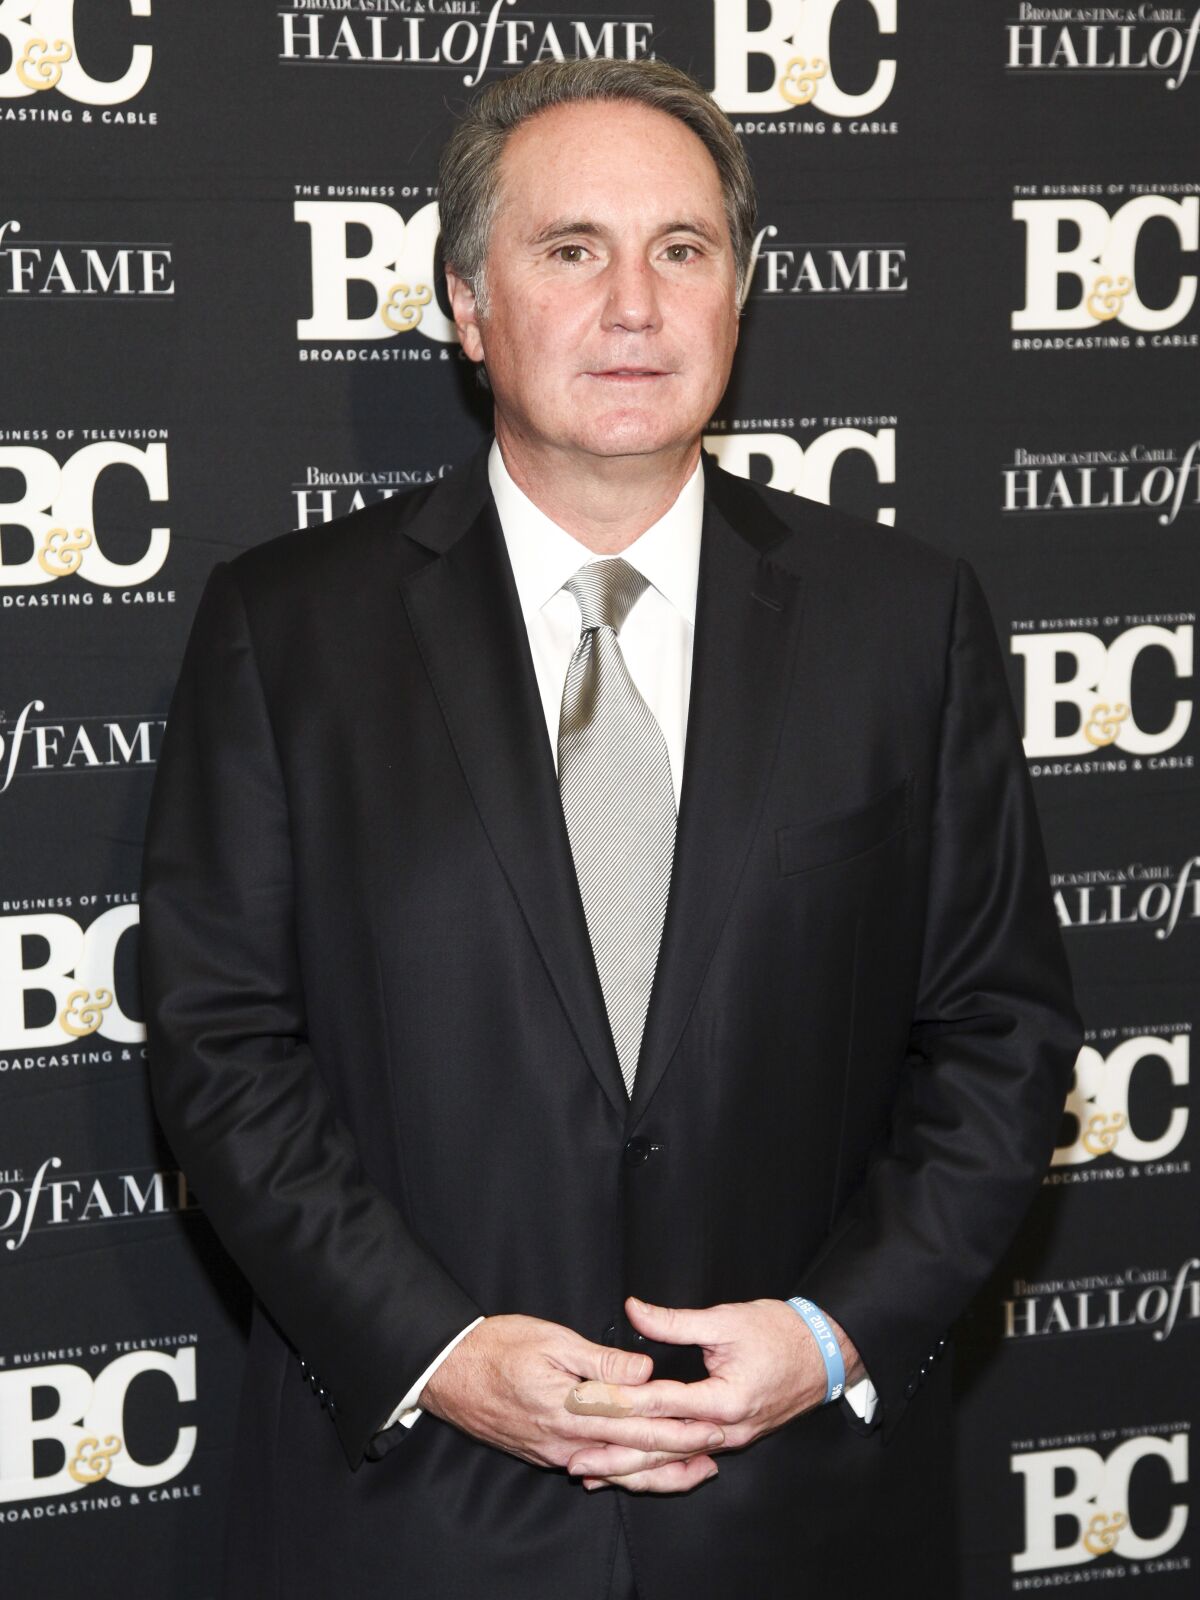 Peter Dunn at the Broadcasting & Cable Hall of Fame Awards in New York in 2017.